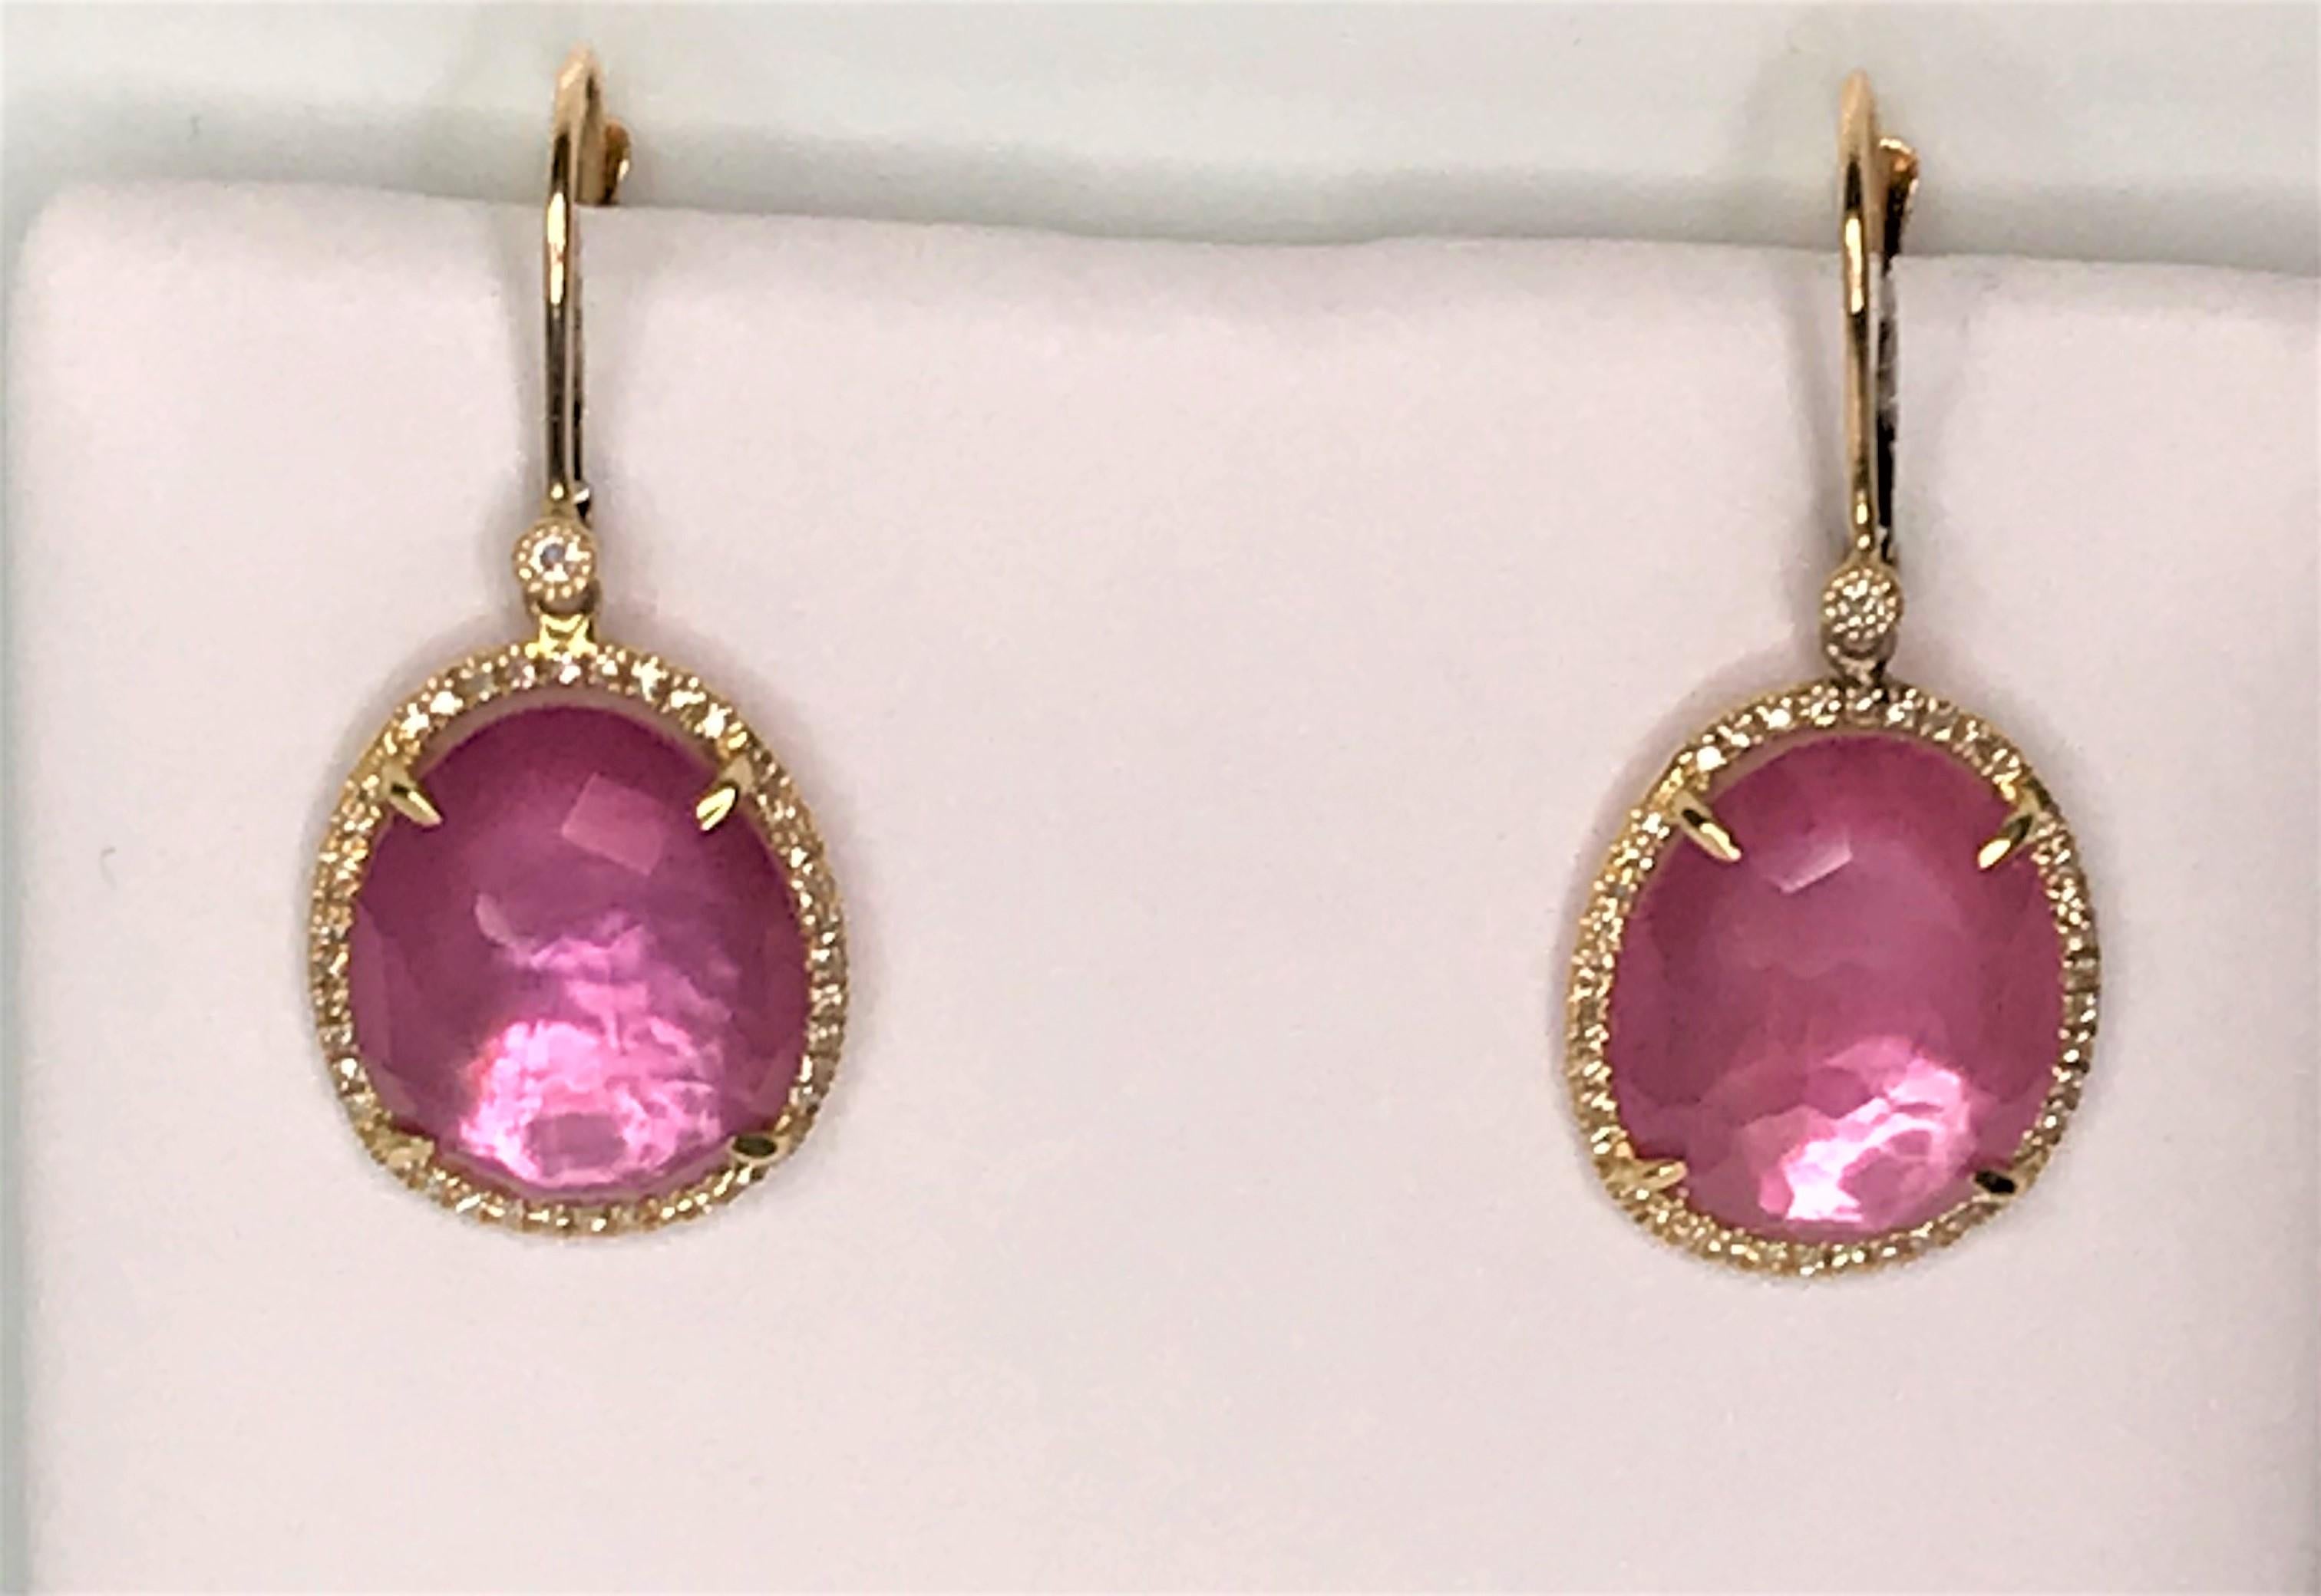 By designer Getana & Co.
14 karat yellow gold 
Vibrant pink tourmaline stones, approximately 11.75 total carat weight.
Pink tourmaline is surrounded by diamonds.
One round cut diamond at the top of each earring near hook connection.
Approximately